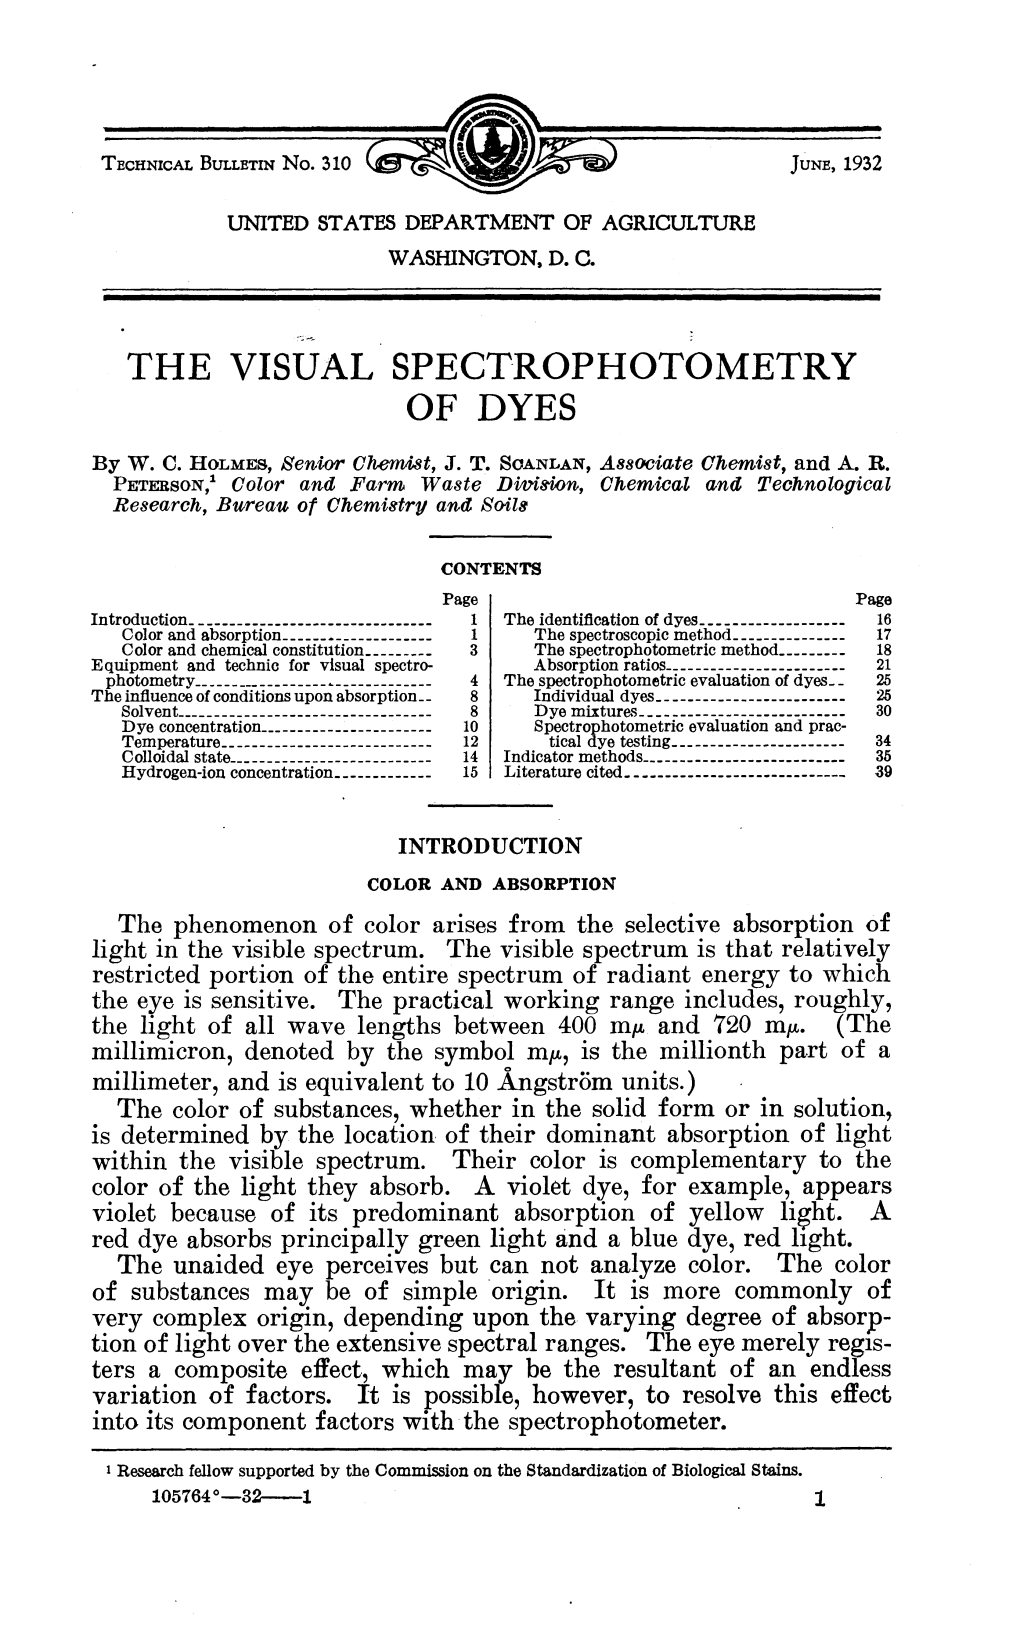 The Visual Spectrophotometry of Dyes